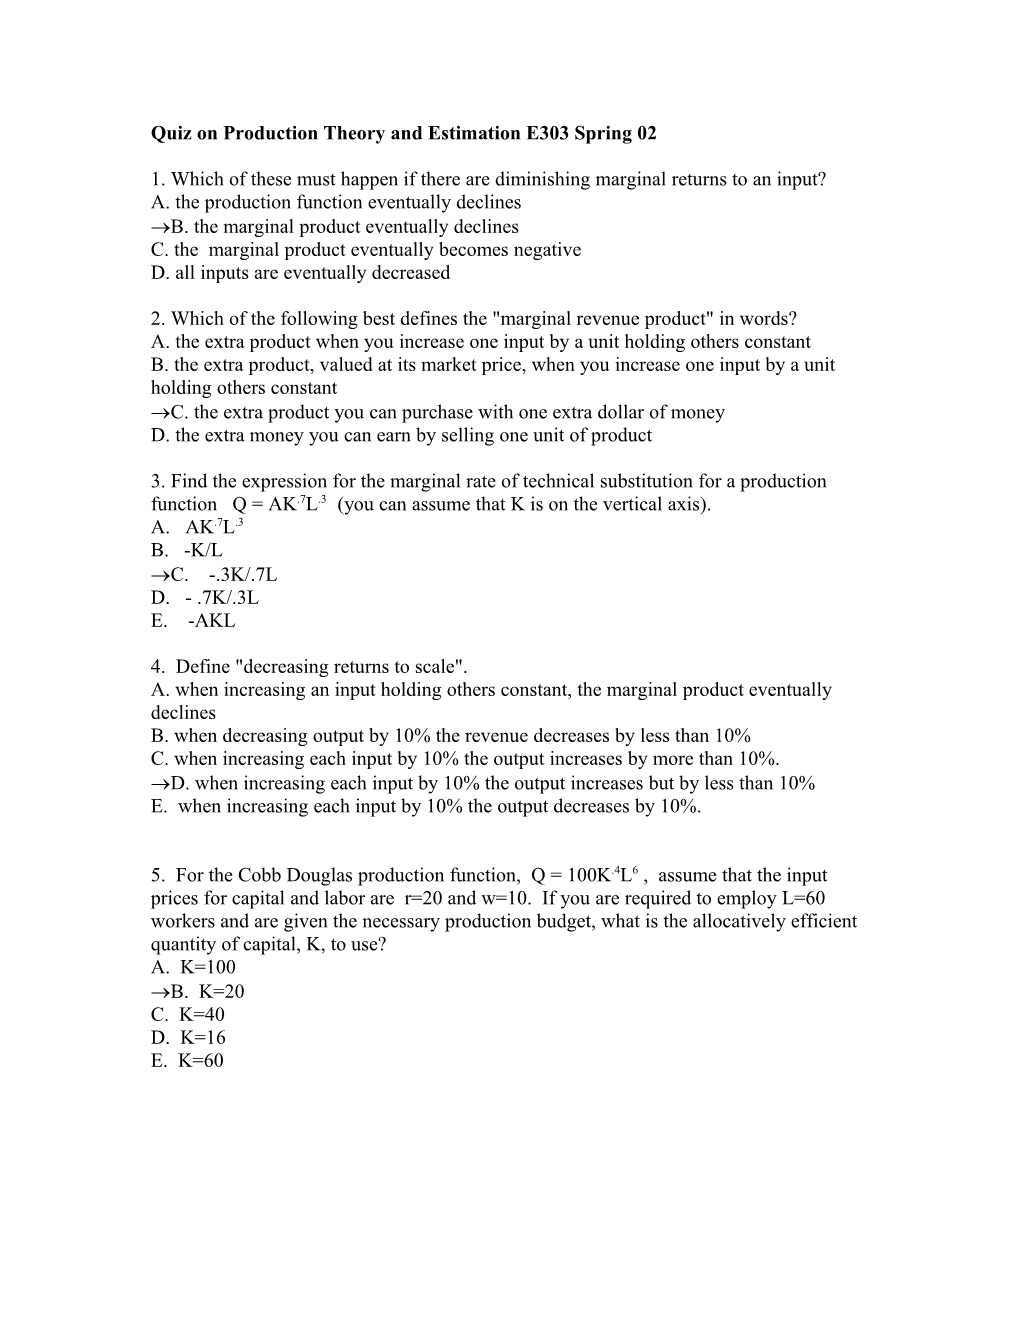 Quiz on Production Theory and Estimation E303 Spring 02